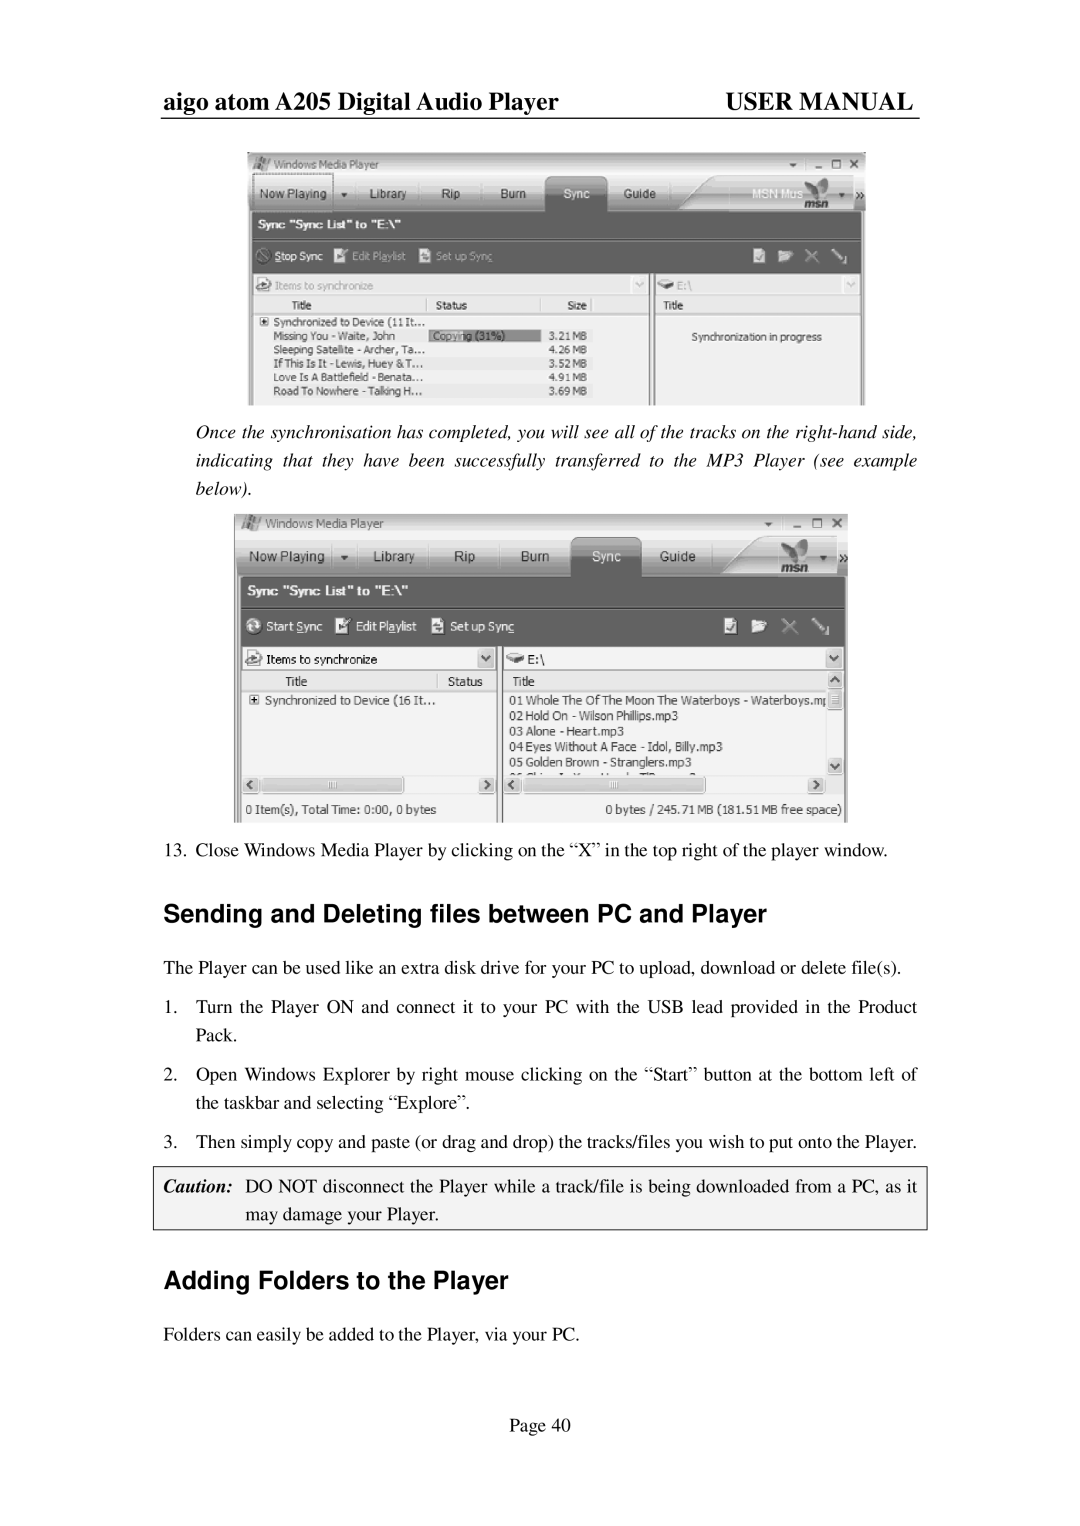 Aigo atom A205 user manual Sending and Deleting files between PC and Player, Adding Folders to the Player 